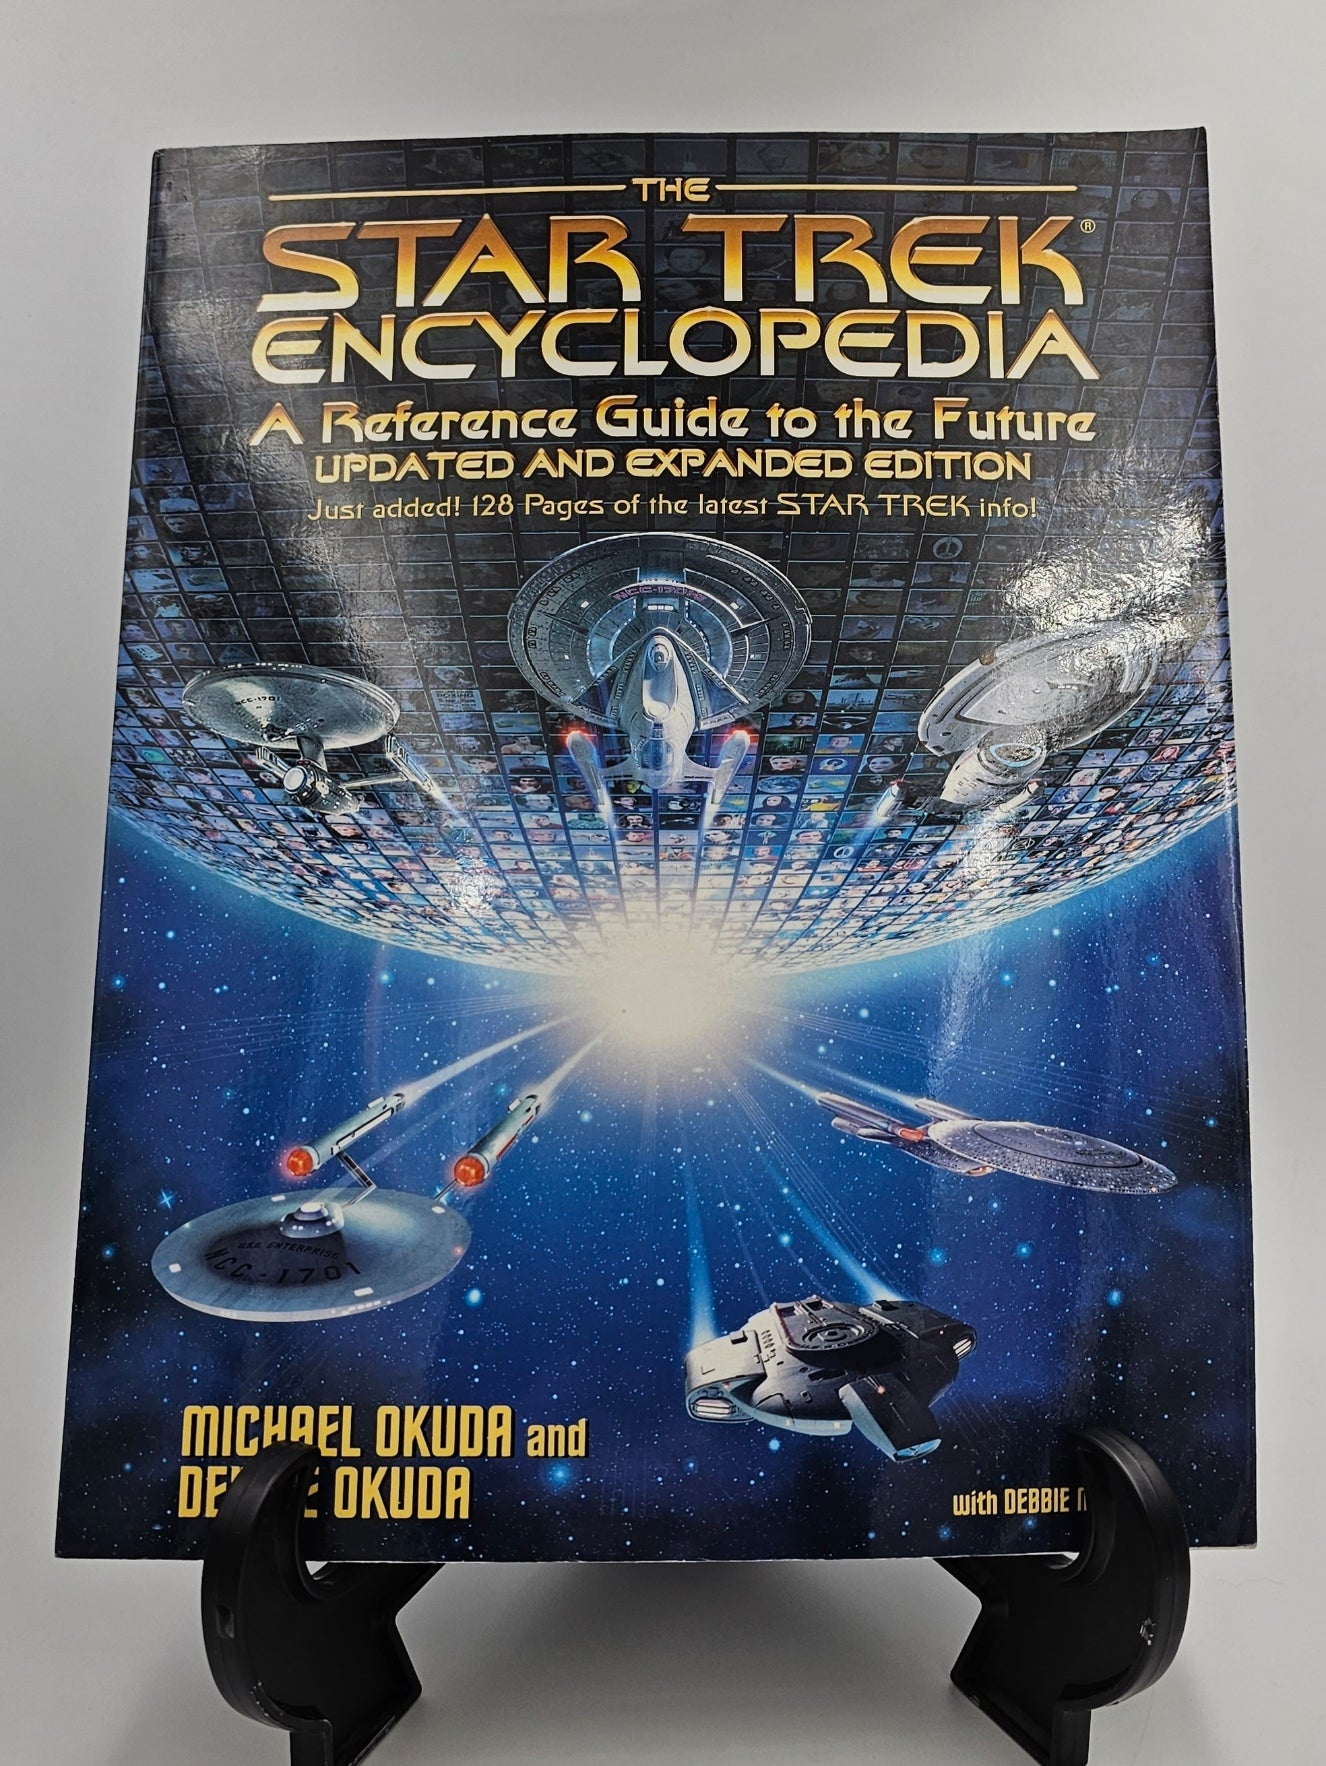 The Star Trek Encyclopedia: A Reference Guide to the Future By: Michael Okuda and Denise Okuda